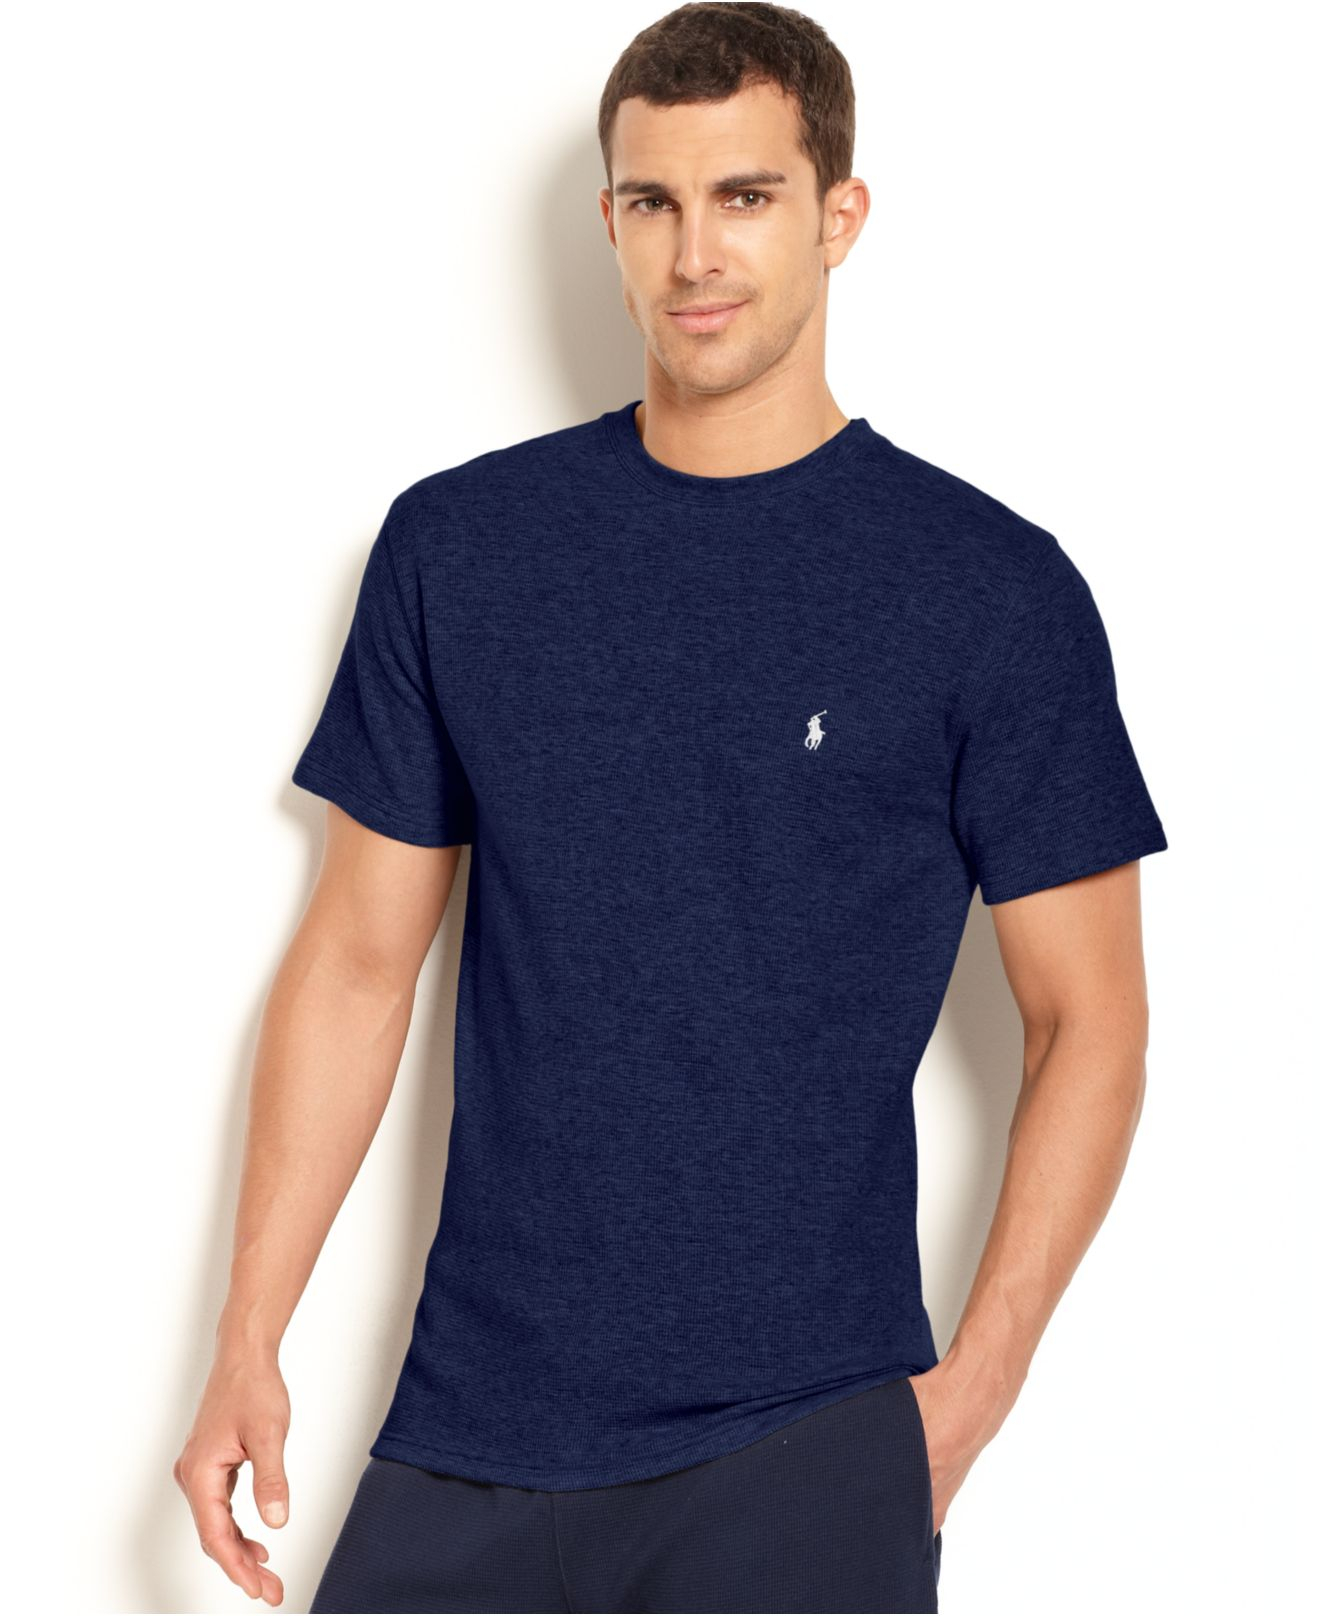 Polo Ralph Lauren Cotton Waffle-knit Thermal Crew-neck T-shirt in Blue